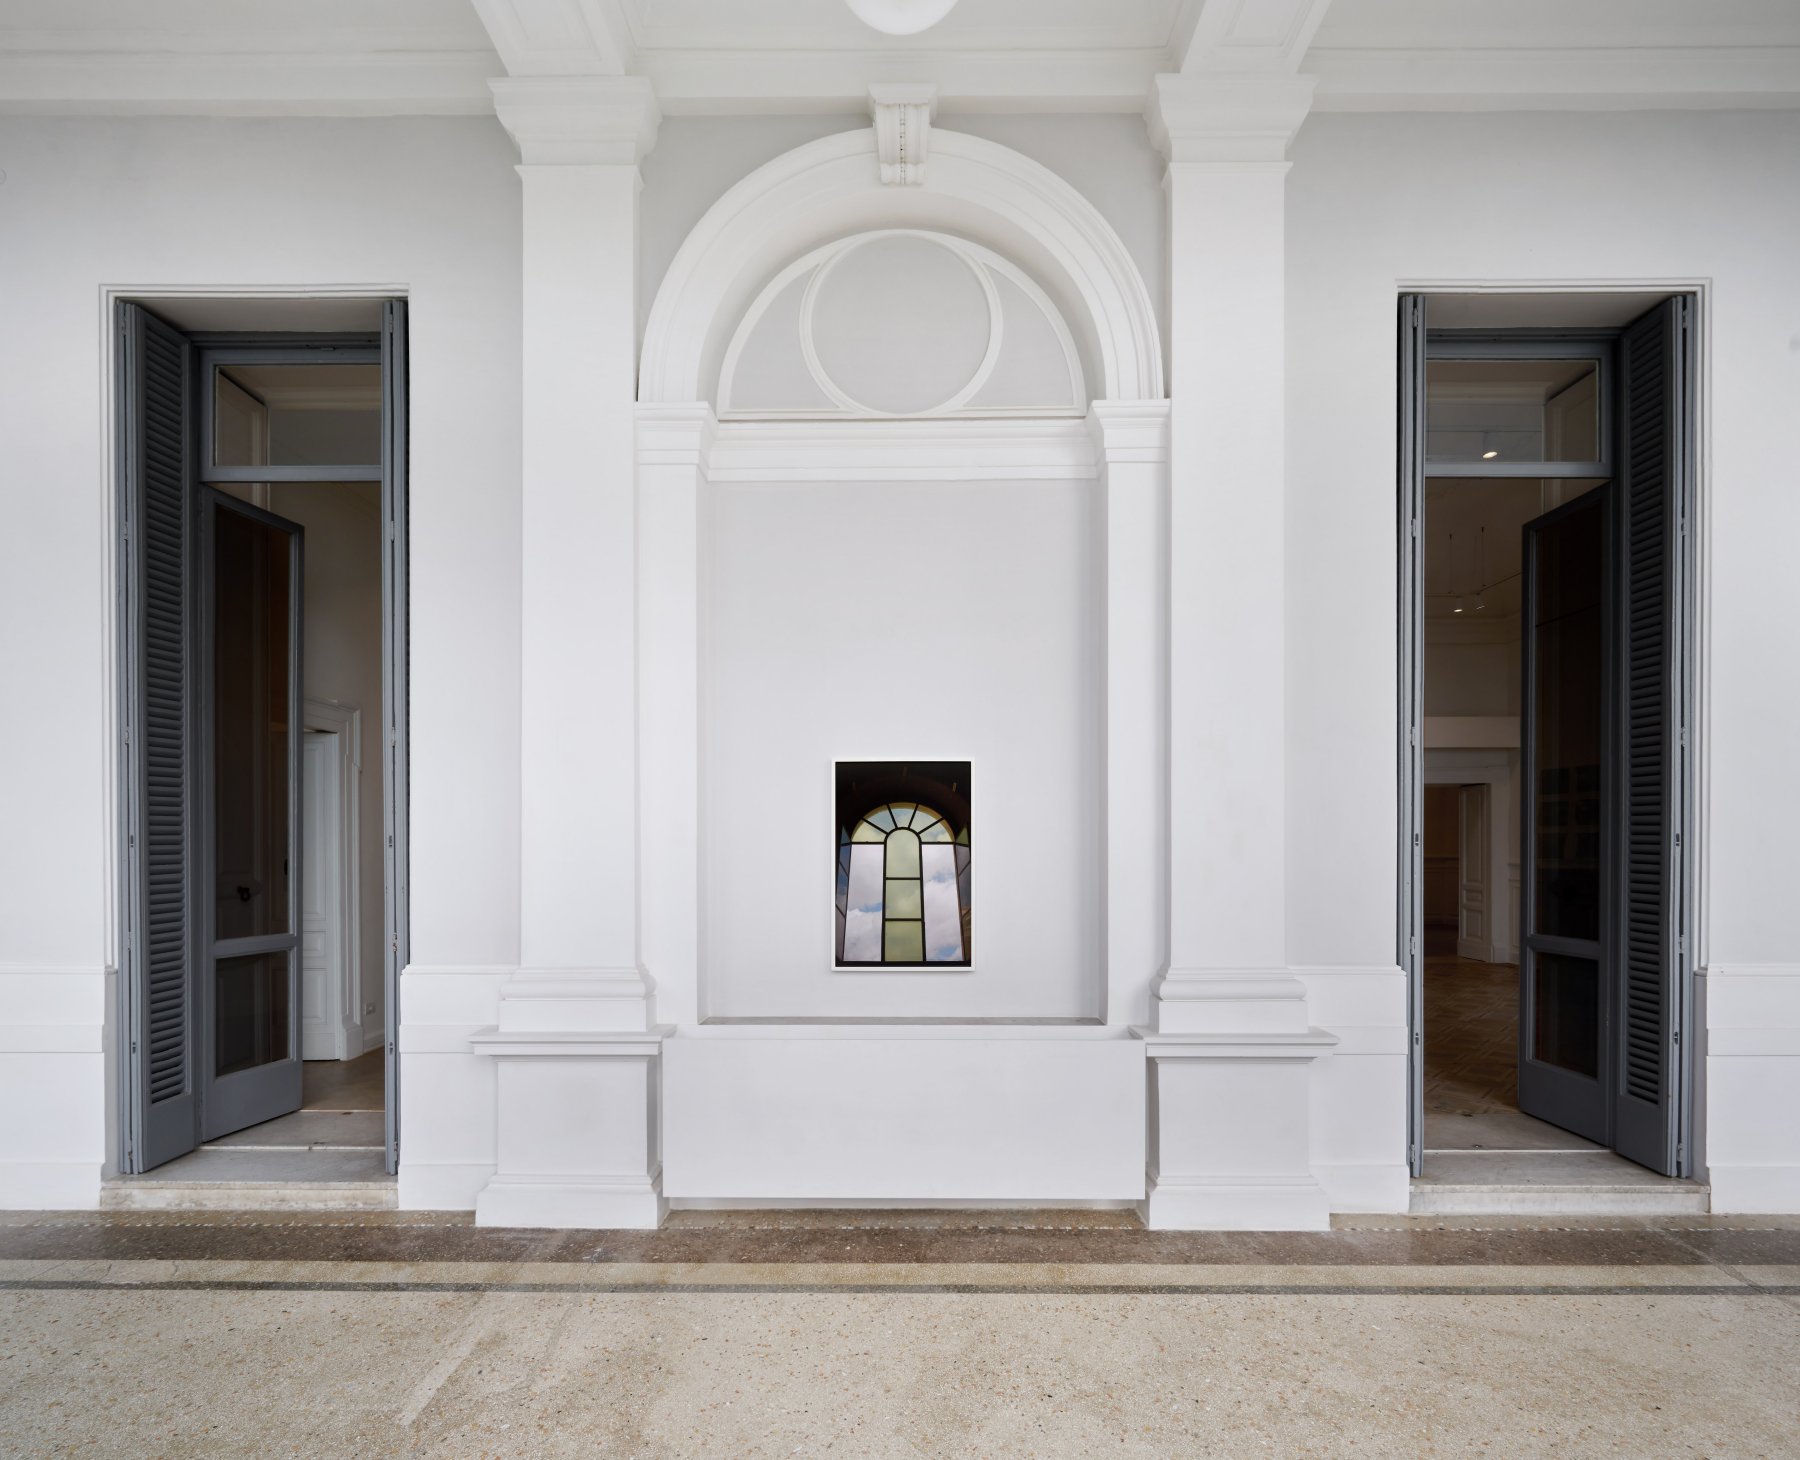 Installation image for Catherine Opie: Walls, Windows and Blood, at Thomas Dane Gallery